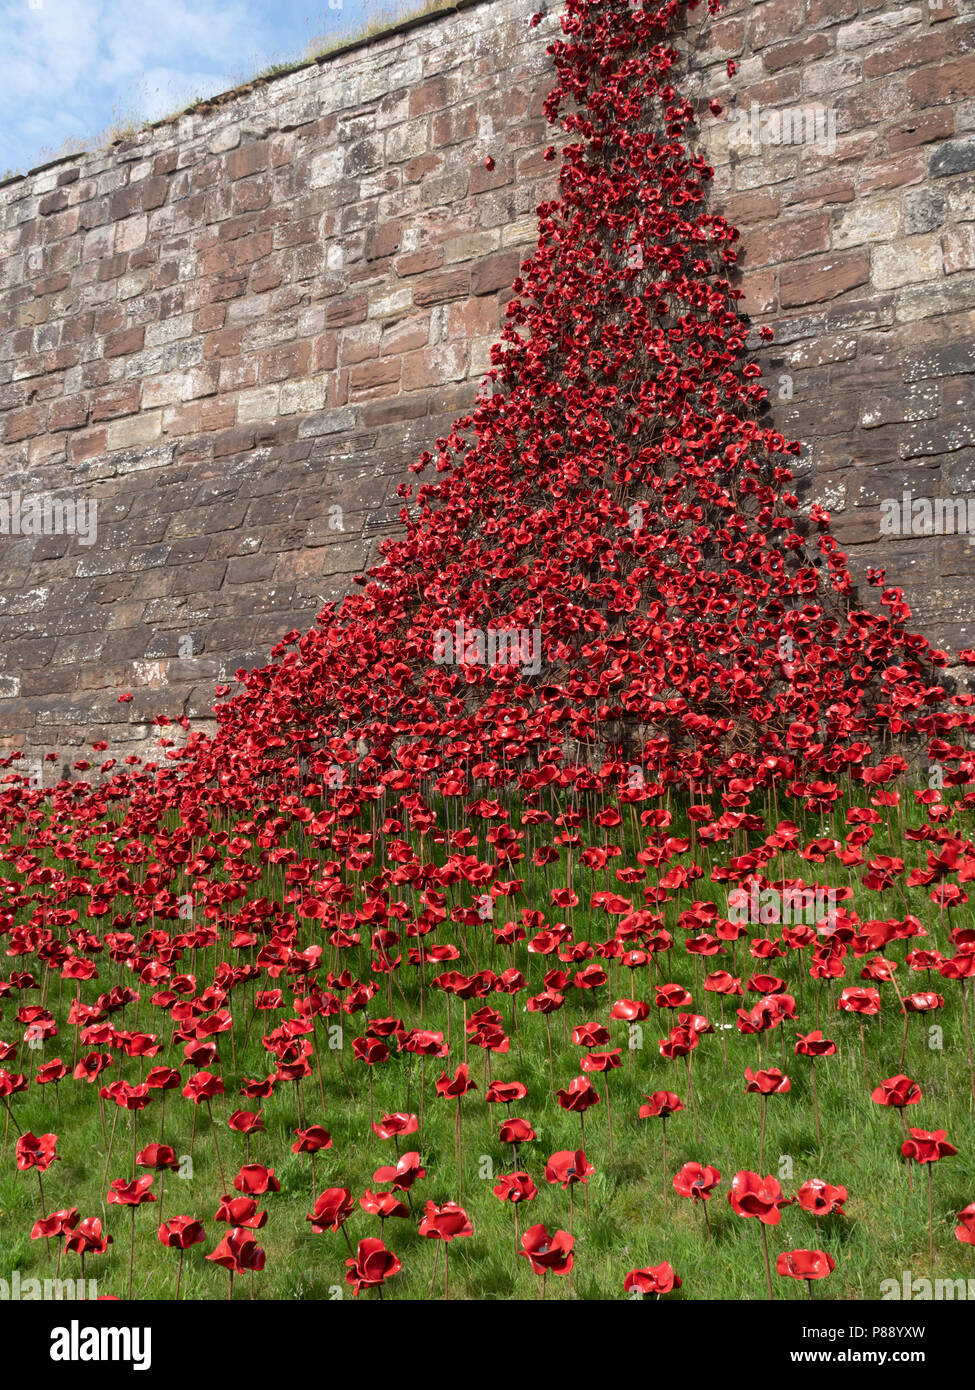 Carlisle Castle, Cumbria, UK:Weeping Window commemorative art installation, 100 years since WW1. 888,246 ceramic art poppies mark the number of lives  Stock Photo